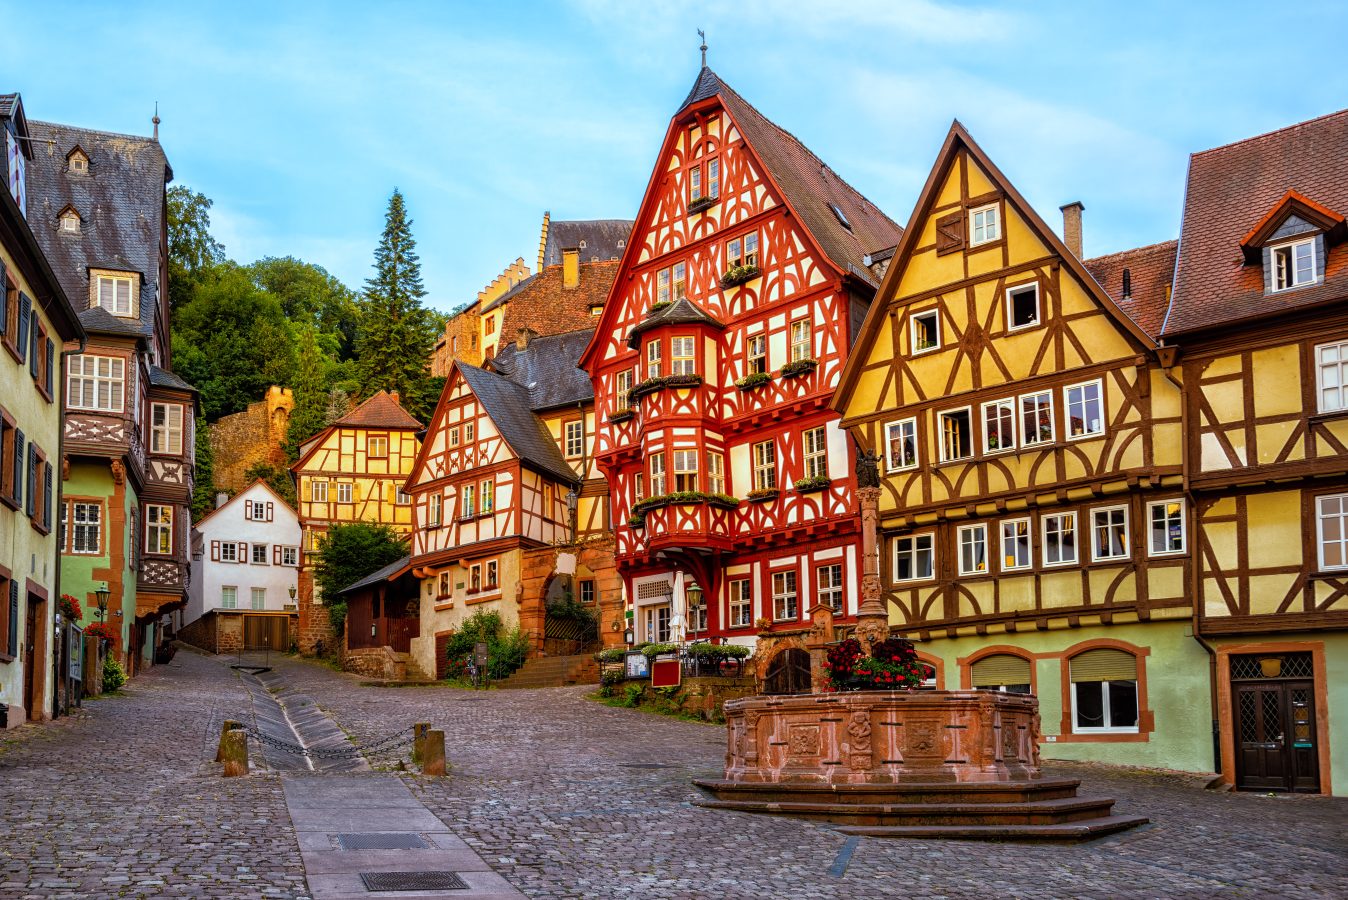 Colorful half-timbered houses in Miltenberg historical medieval Old Town, Bavaria, Germany. Germany's is a popular destination for study abroad programs.